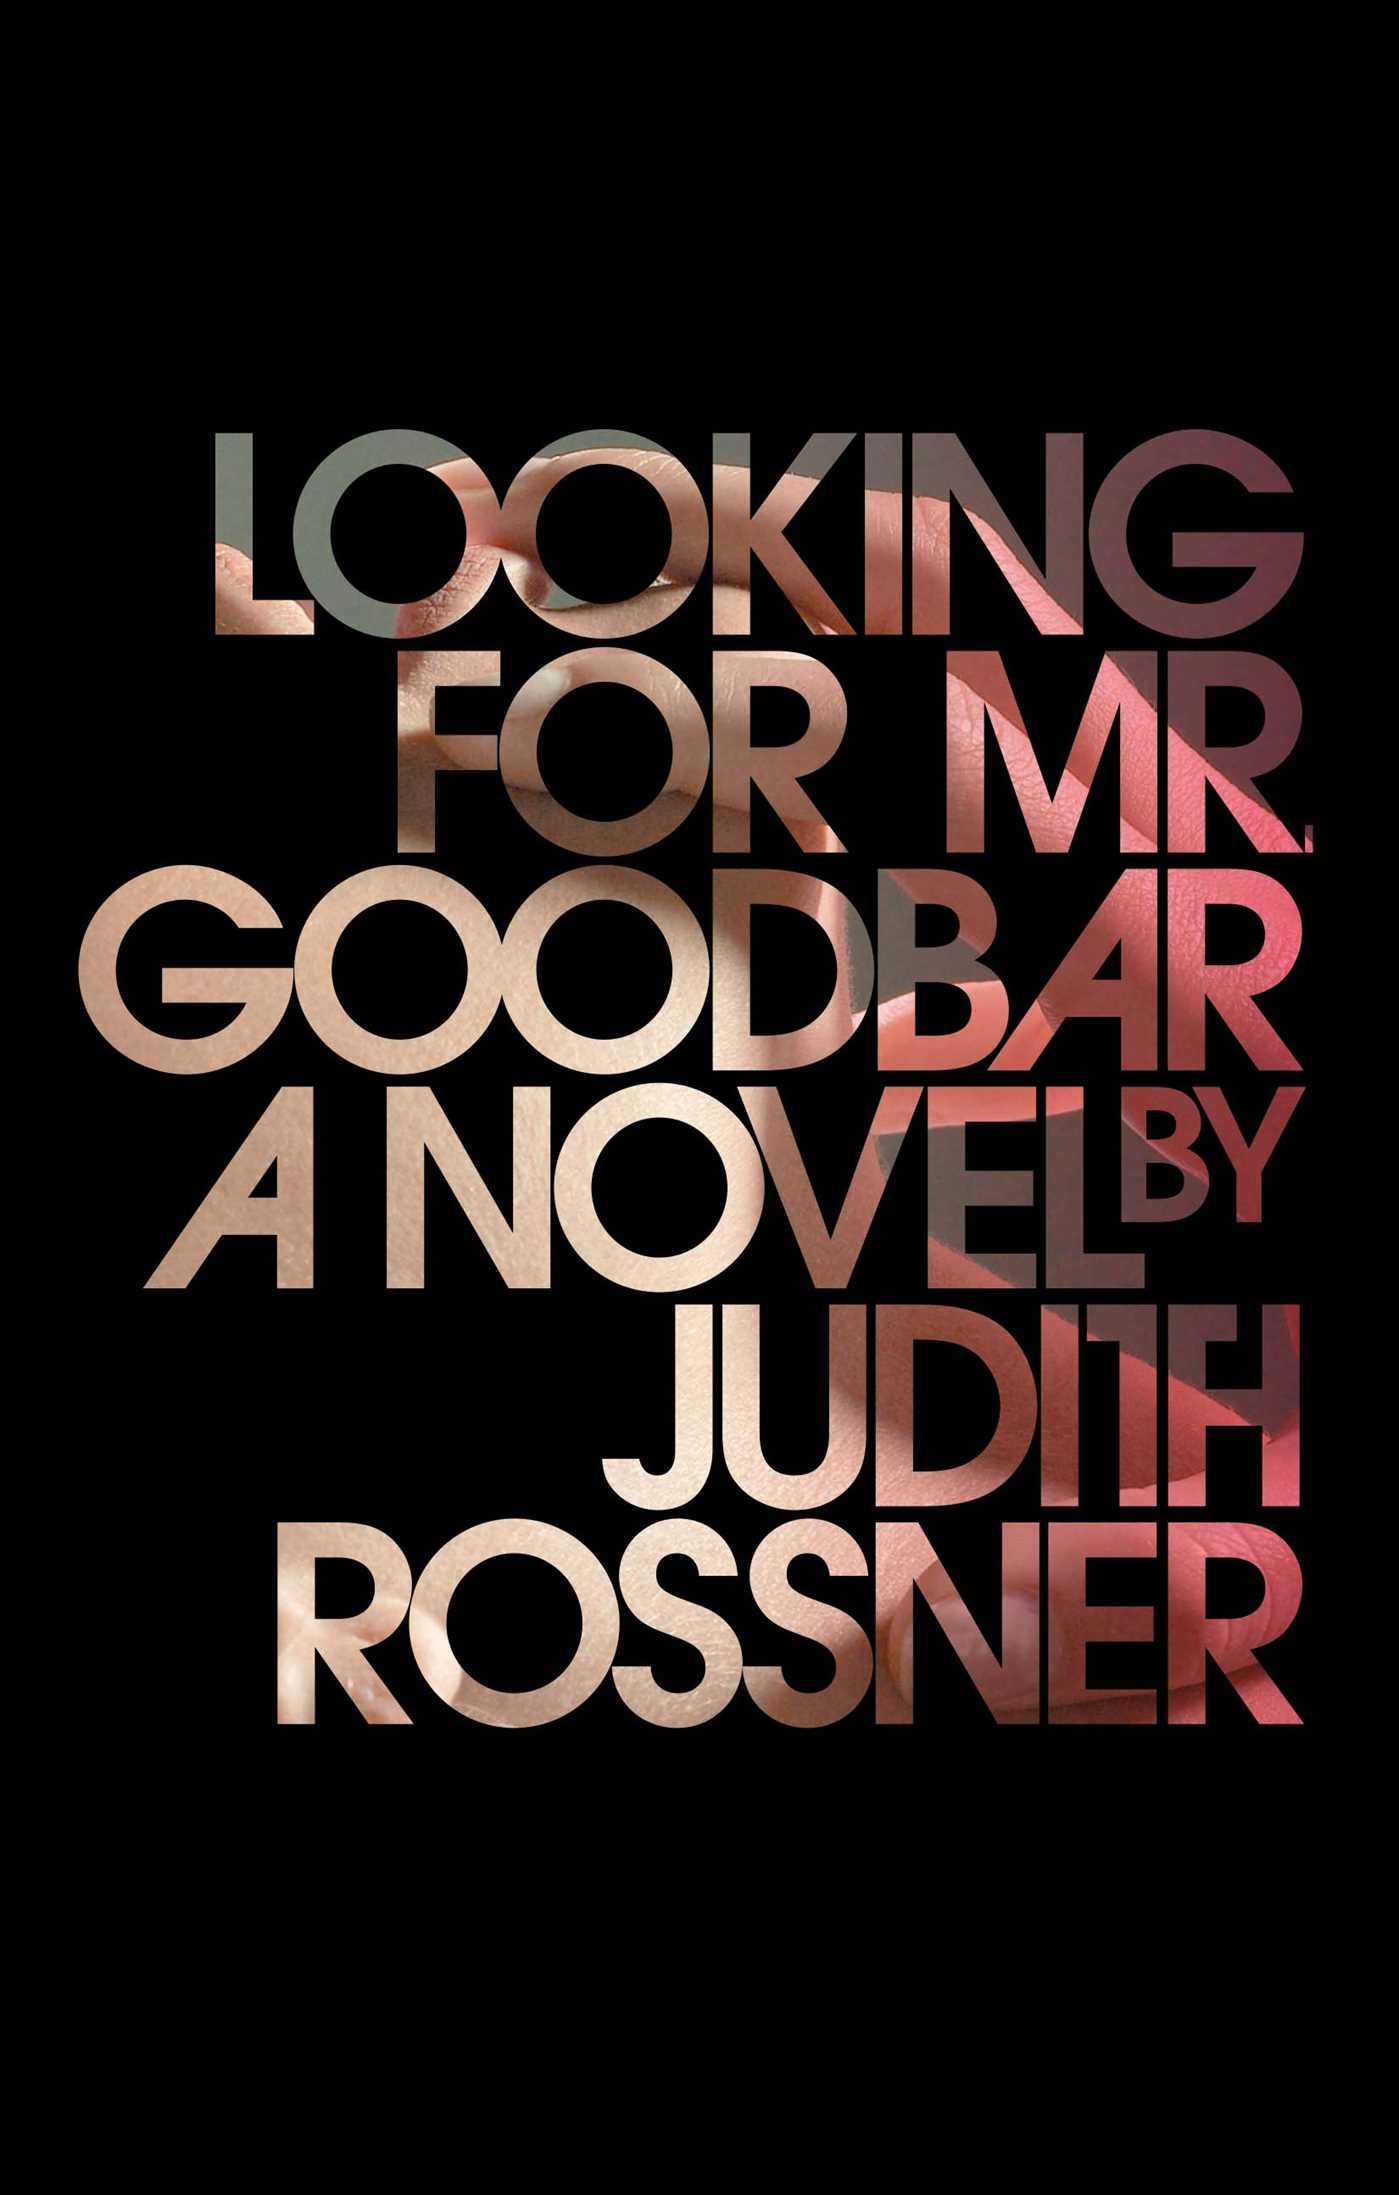 A stylized book cover design for "looking for mr. goodbar," a novel by judith rossner, with the title's text artistically arranged over a dark background.